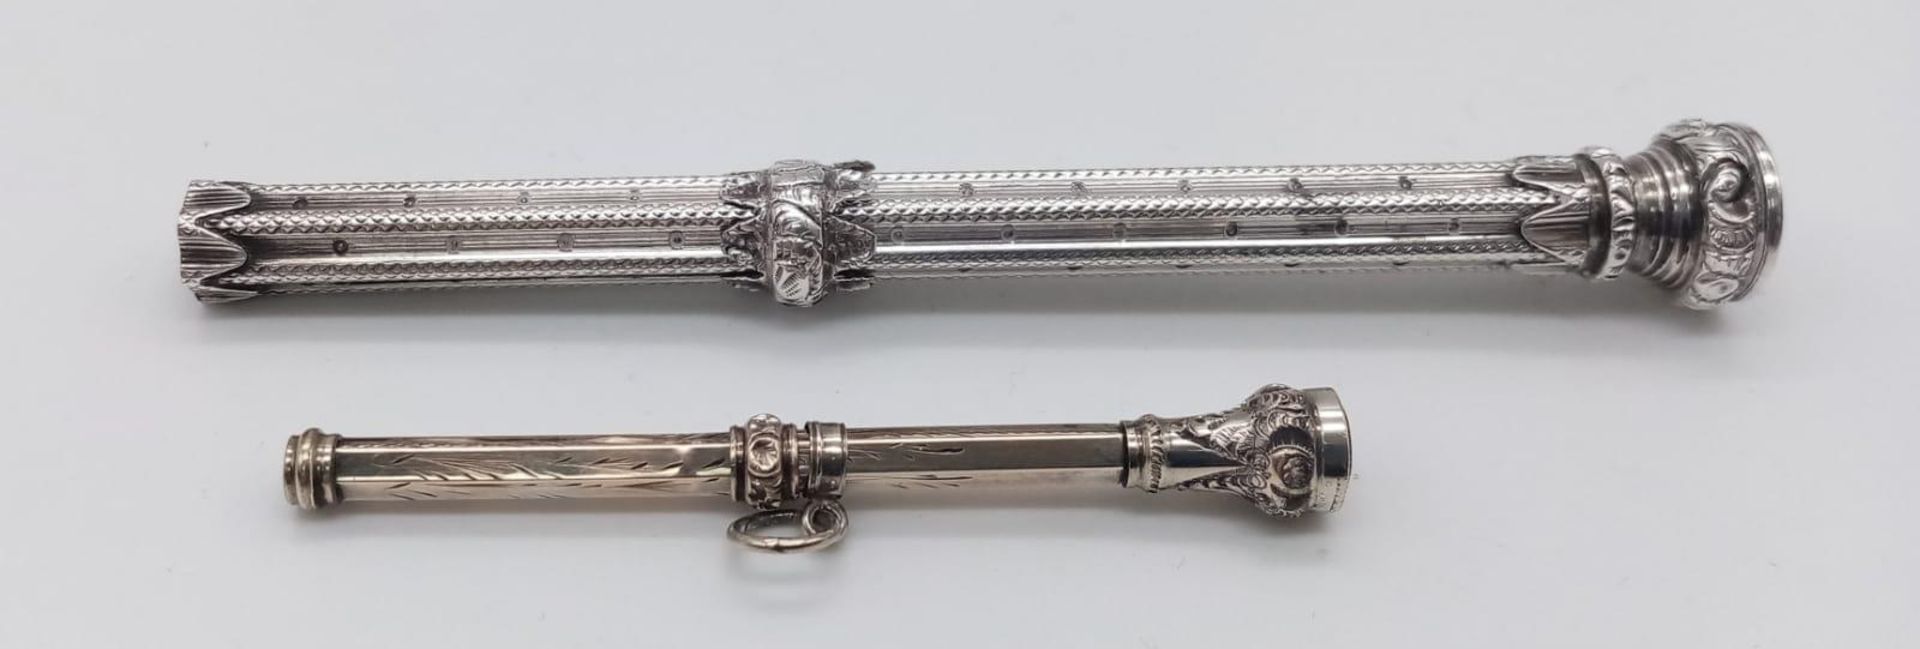 A pair of unmarked, antique jewelled Sliding Pencils. Both ornately patterned, with scrolling